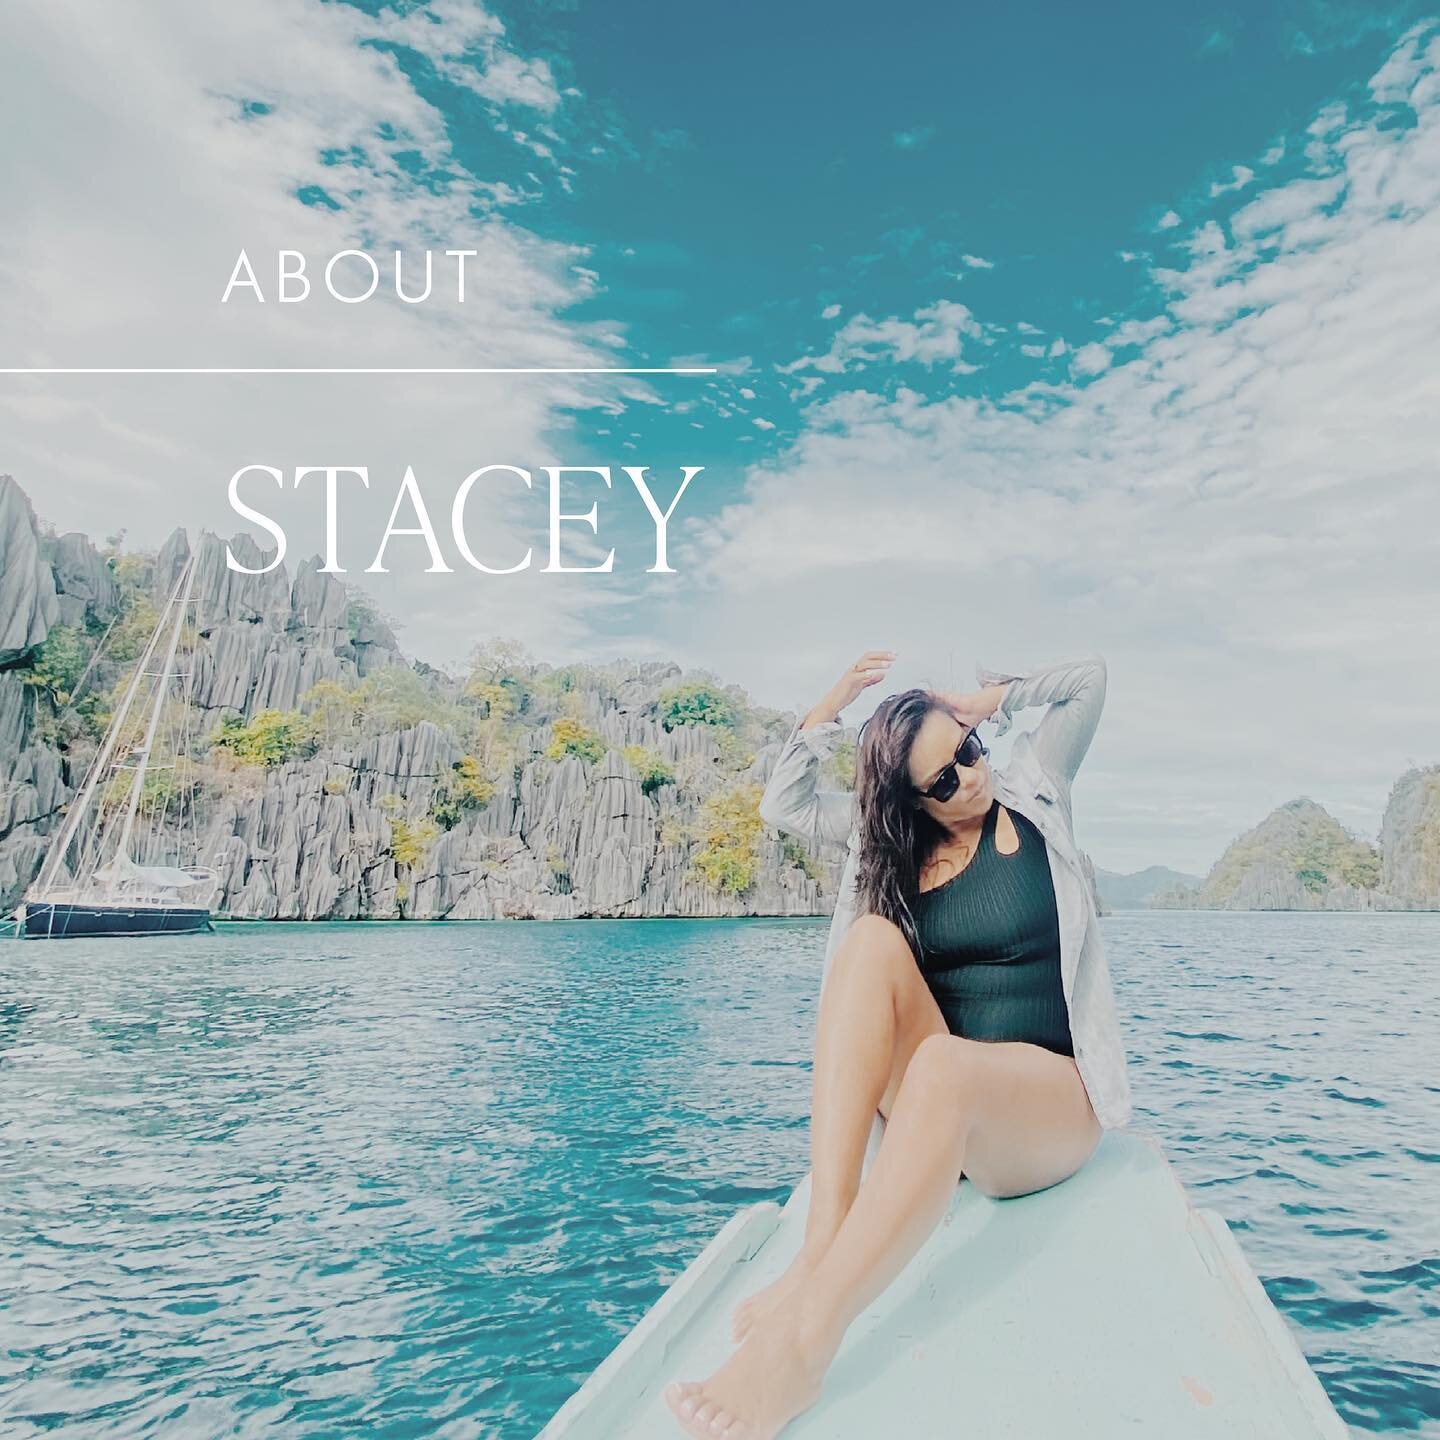 Learn more about our Founder, Stacey Agmata, her vision and what led her to create Seva Hawai&rsquo;i ✨